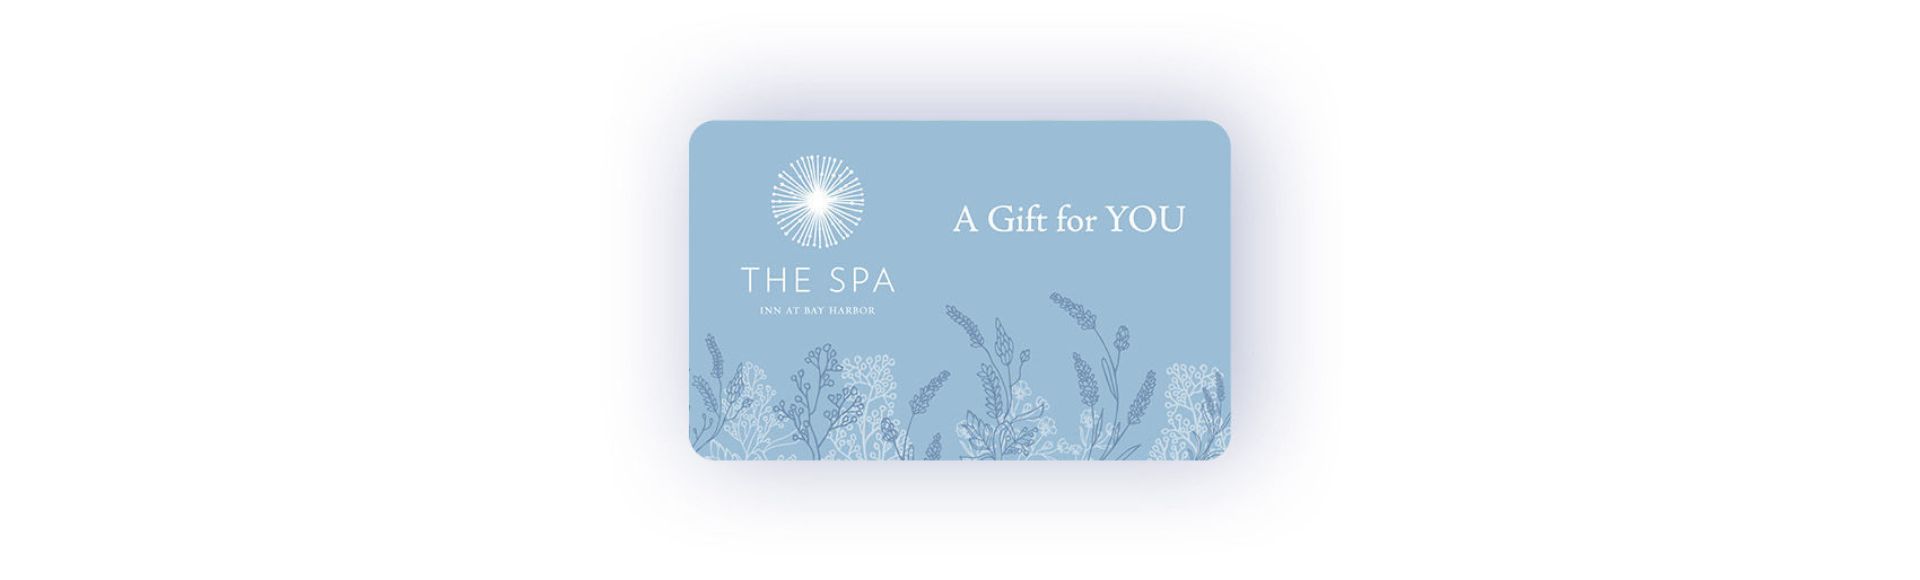 Blue floral Gift for You Spa Gift Card design